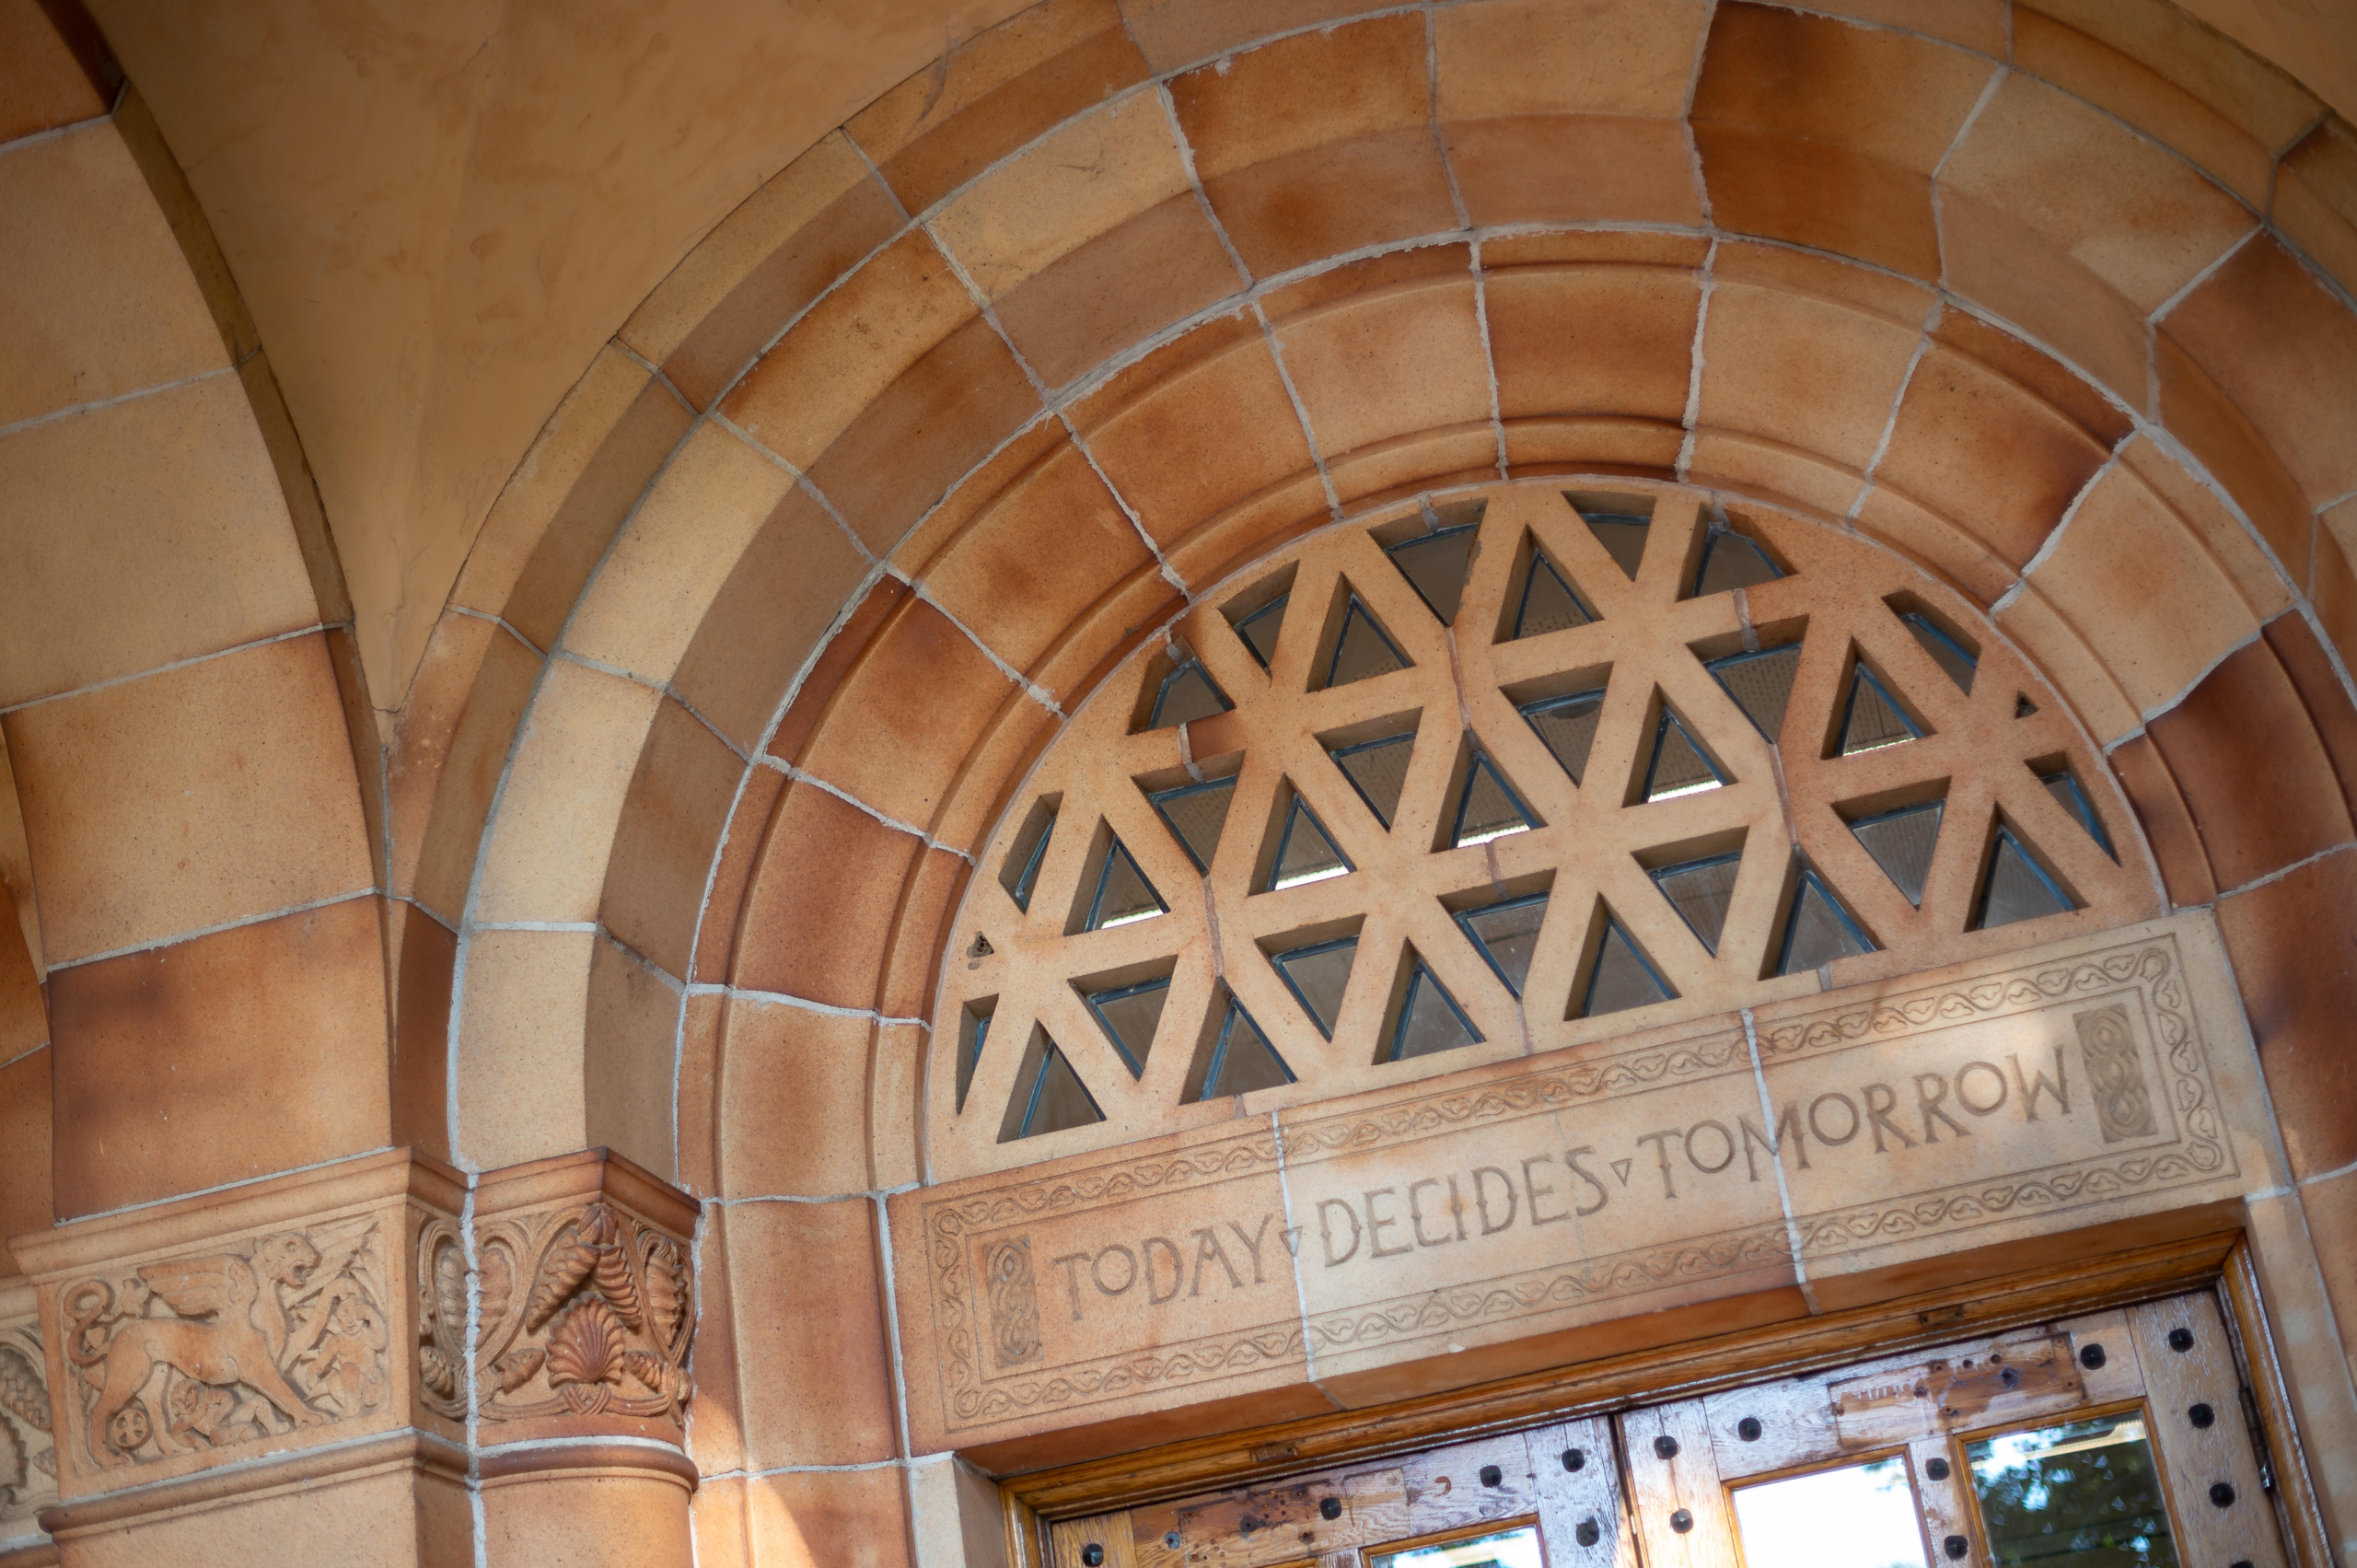 Today Decides Tomorrow is inscribed in stone above the entrance to Kendall hall